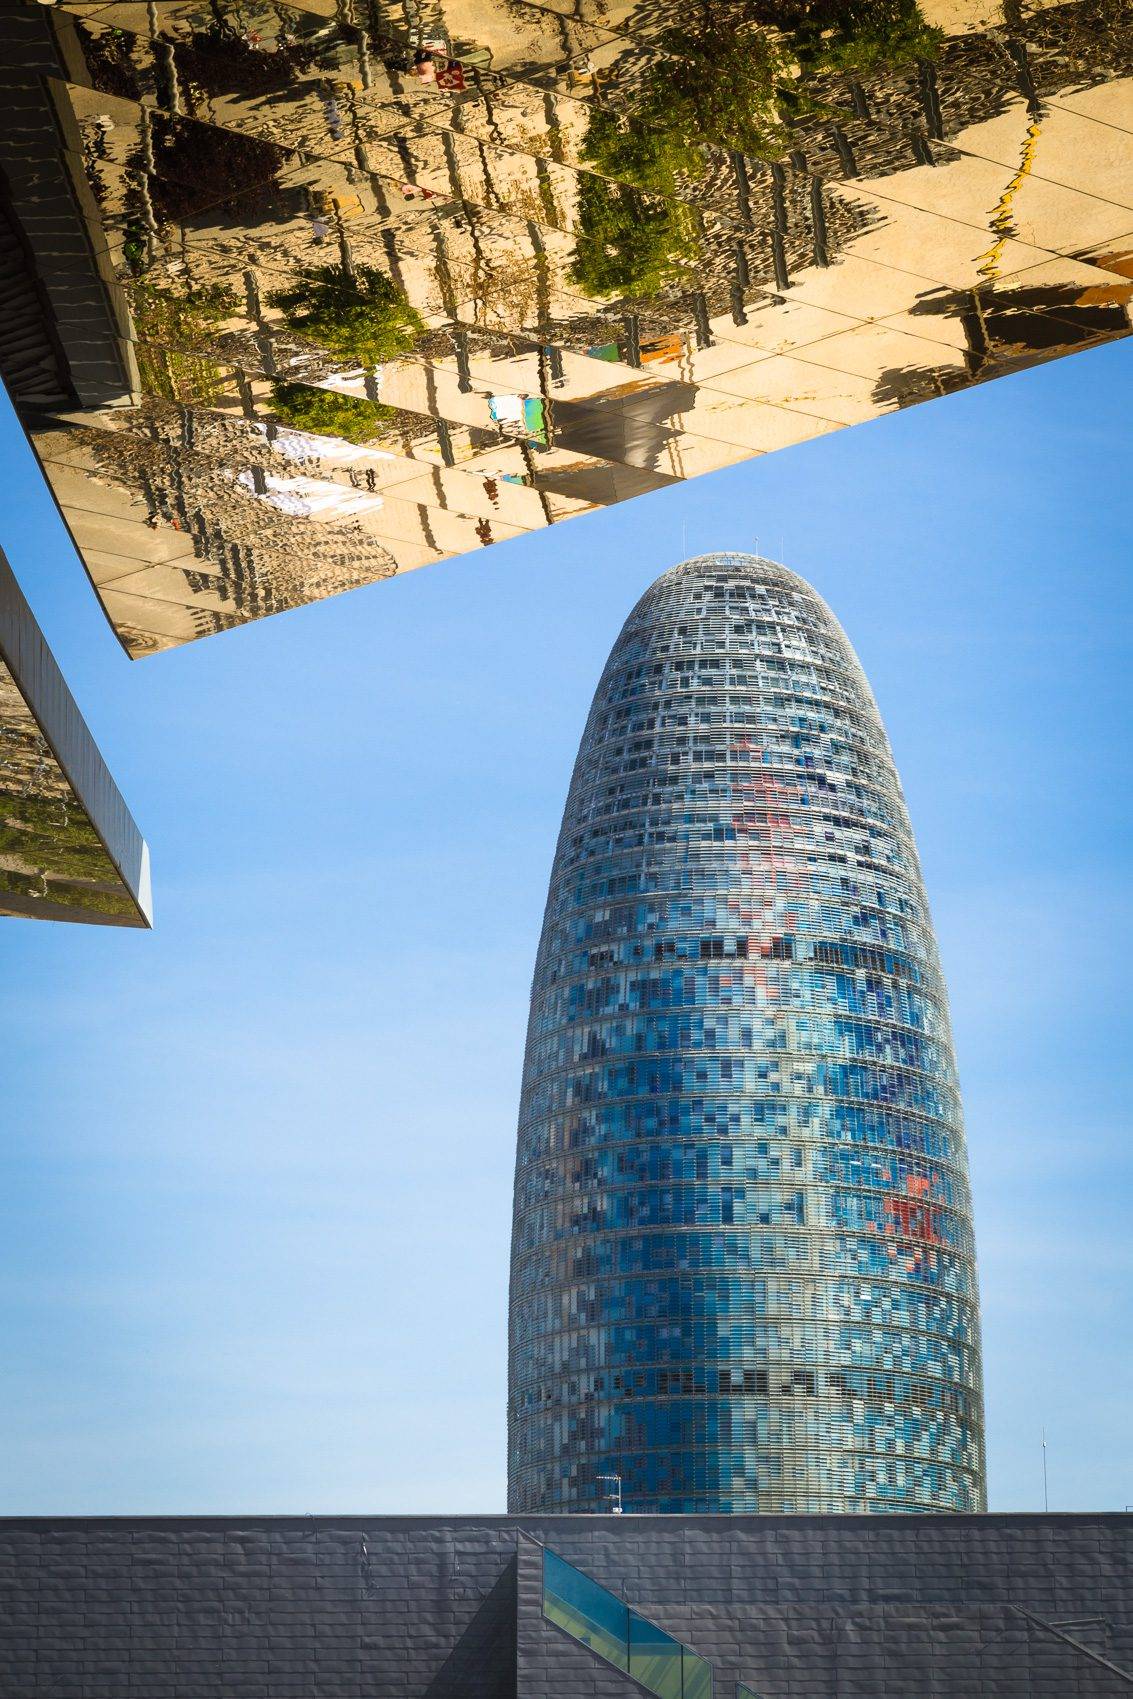 Reflection in mirrored roof of the Encants Vells Flea Market, with the Agbar Tower in the background, Barcelona Spain. BC016